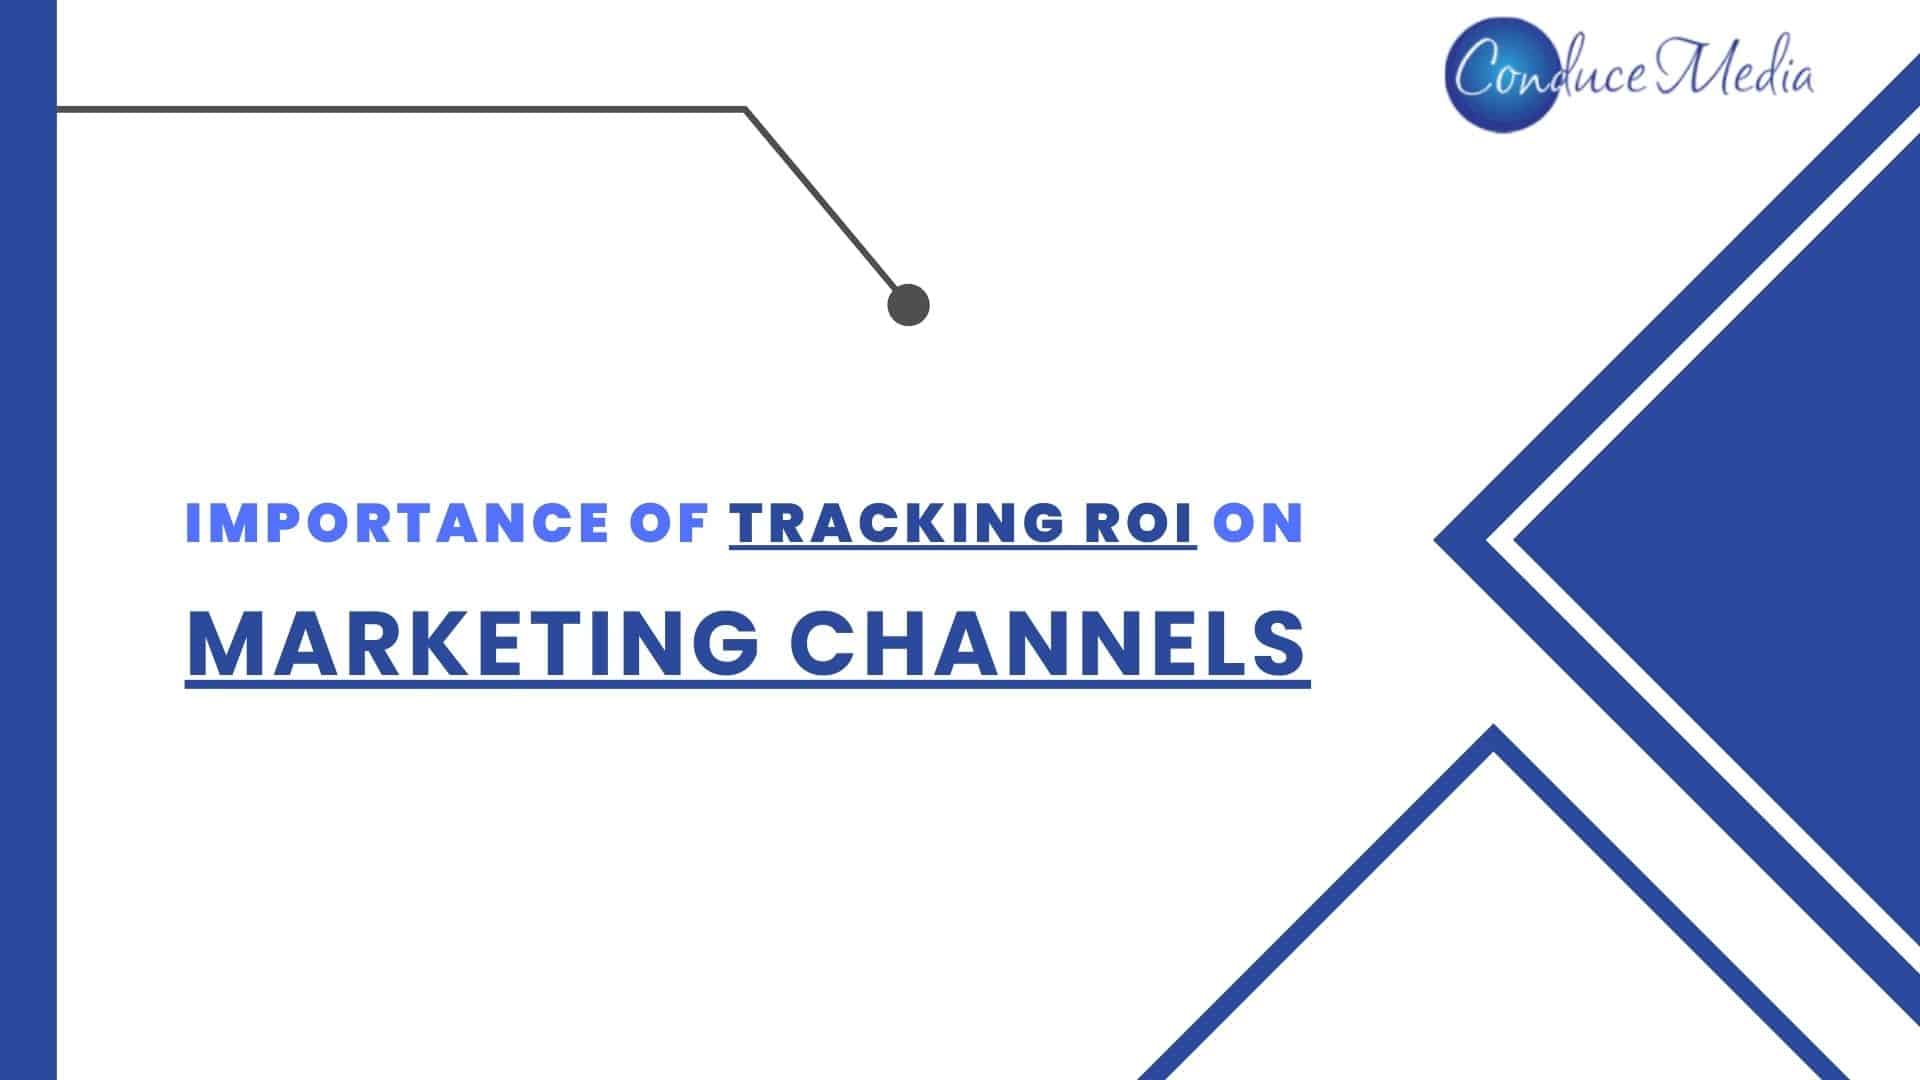 Importance_of_Tracking_ROI_Marketing_Channels